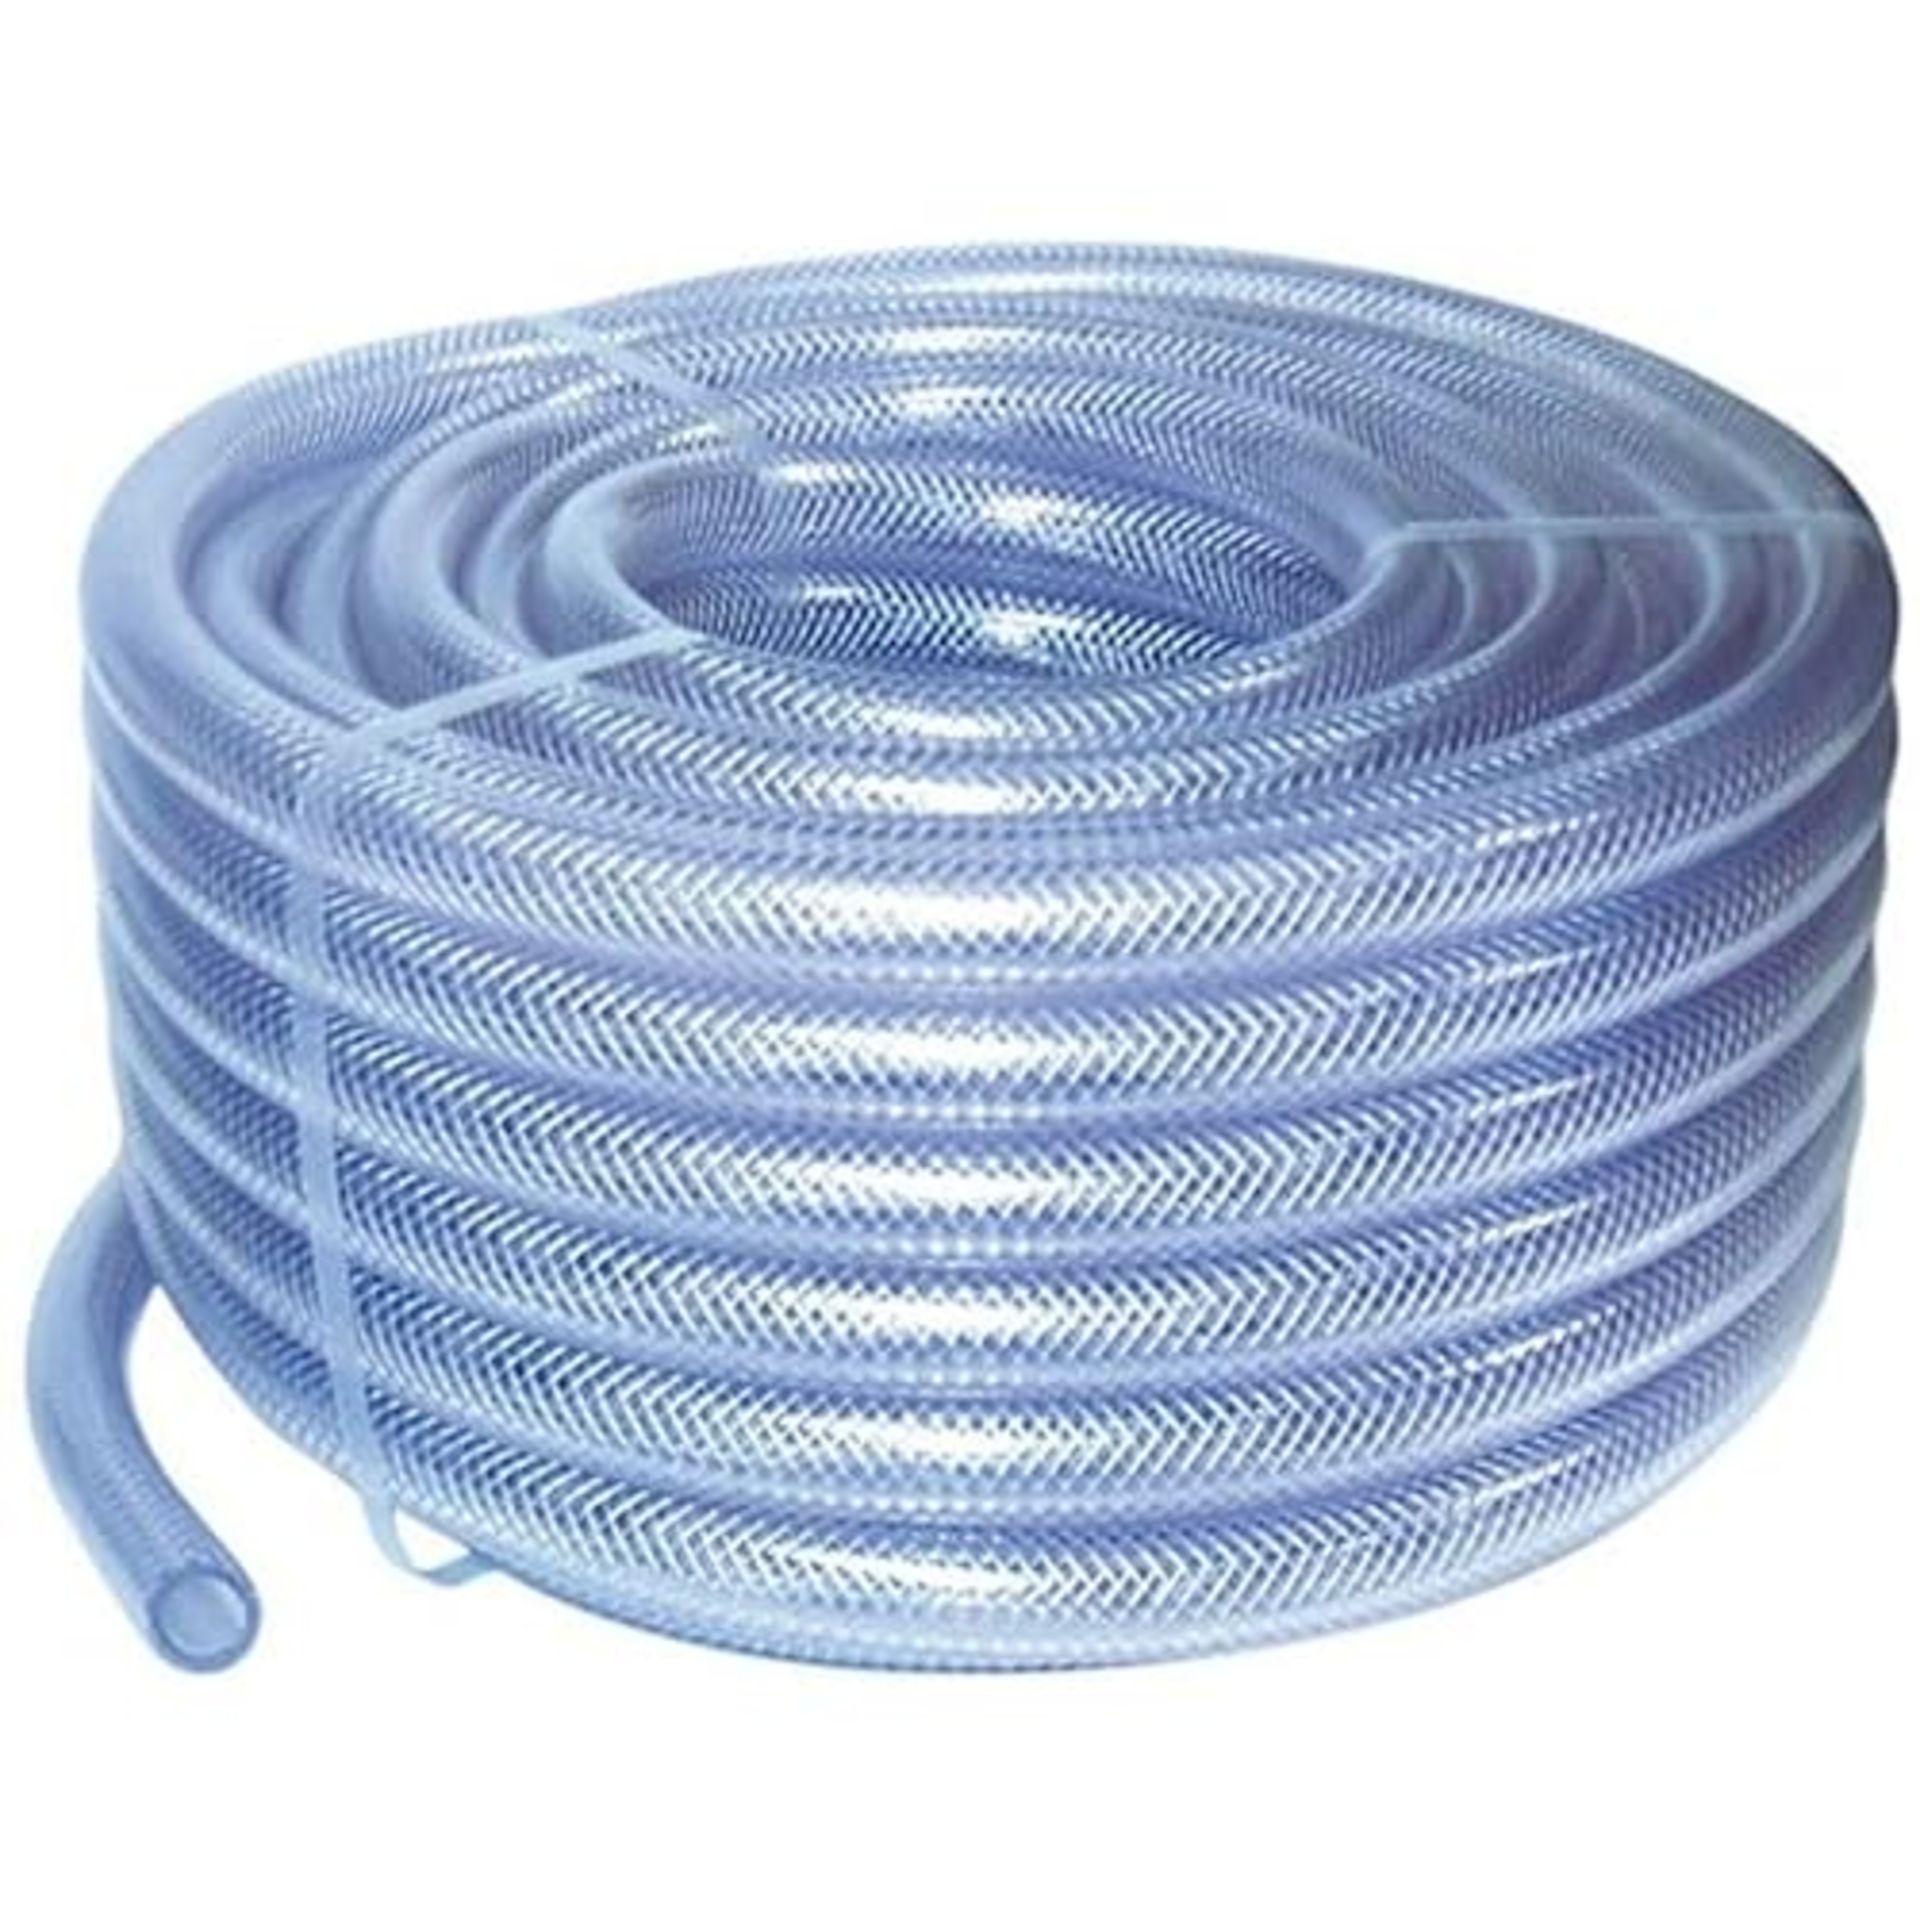 25mm ID 1 Metre Length Clear Braided PVC Hose with Synthetic Reinforcement